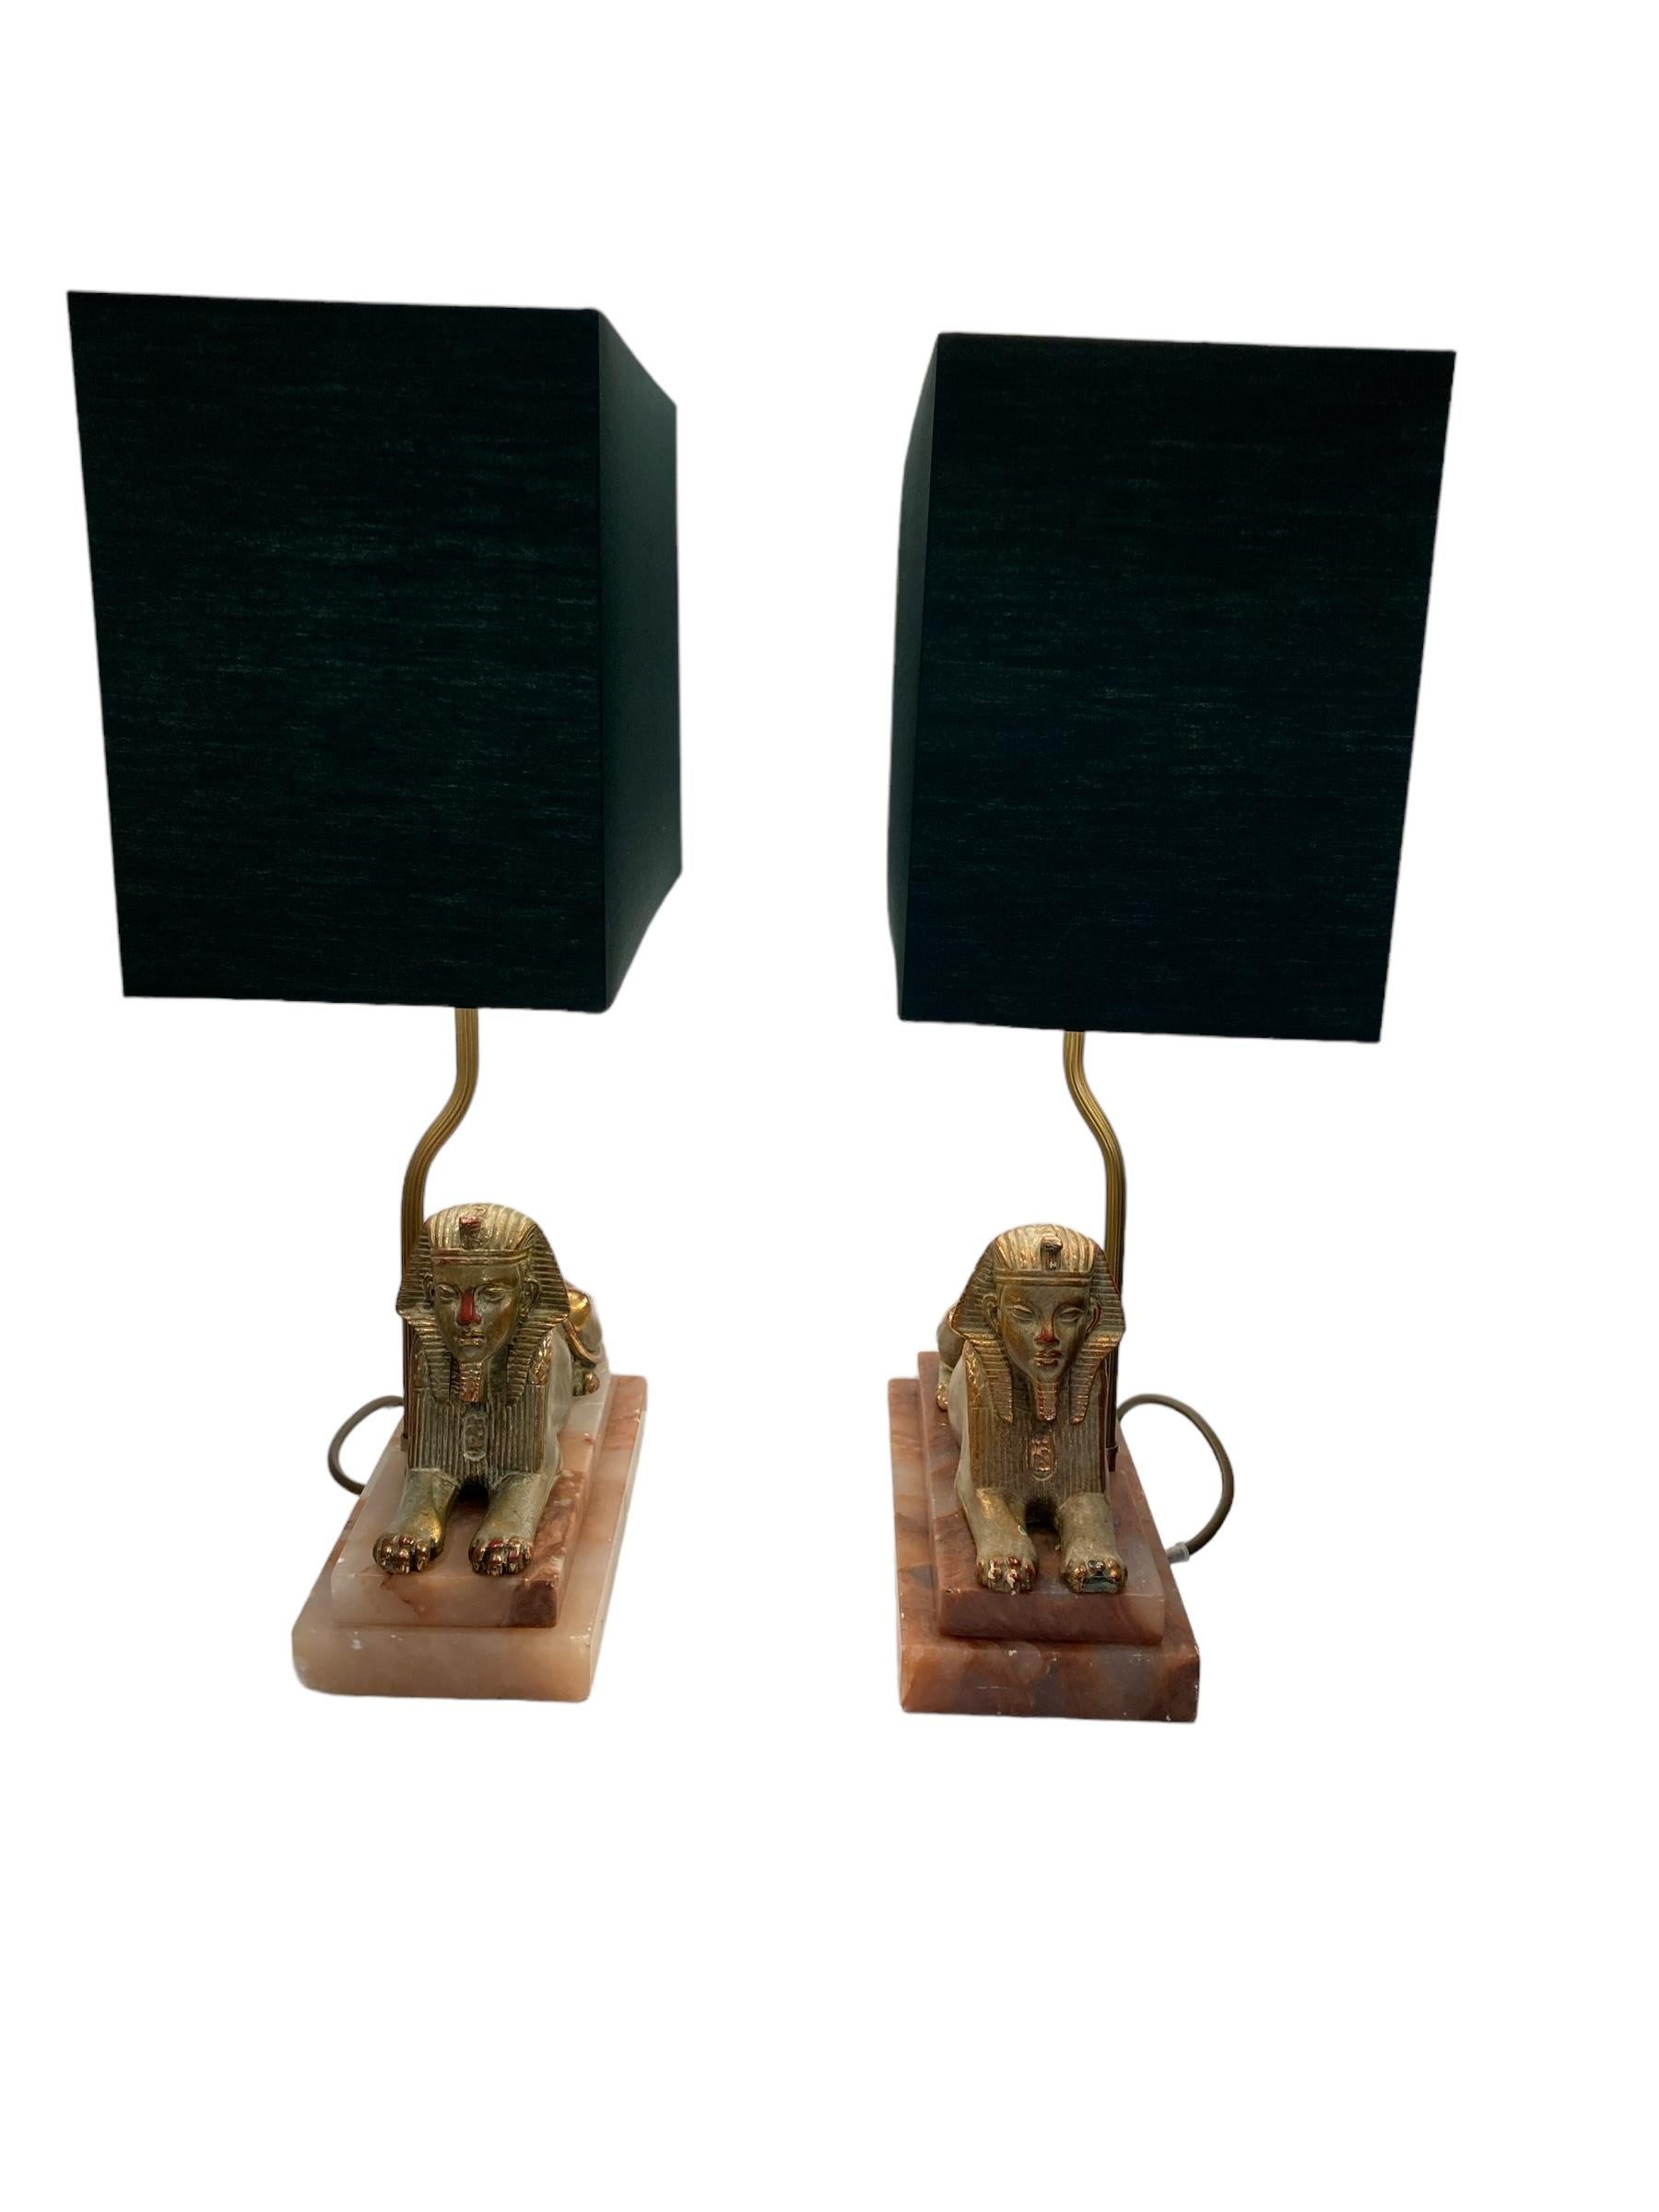 Spelter A Pair of Art Deco Egytian Sphinx Table Lamps on a Marble Base Dark Green Shades